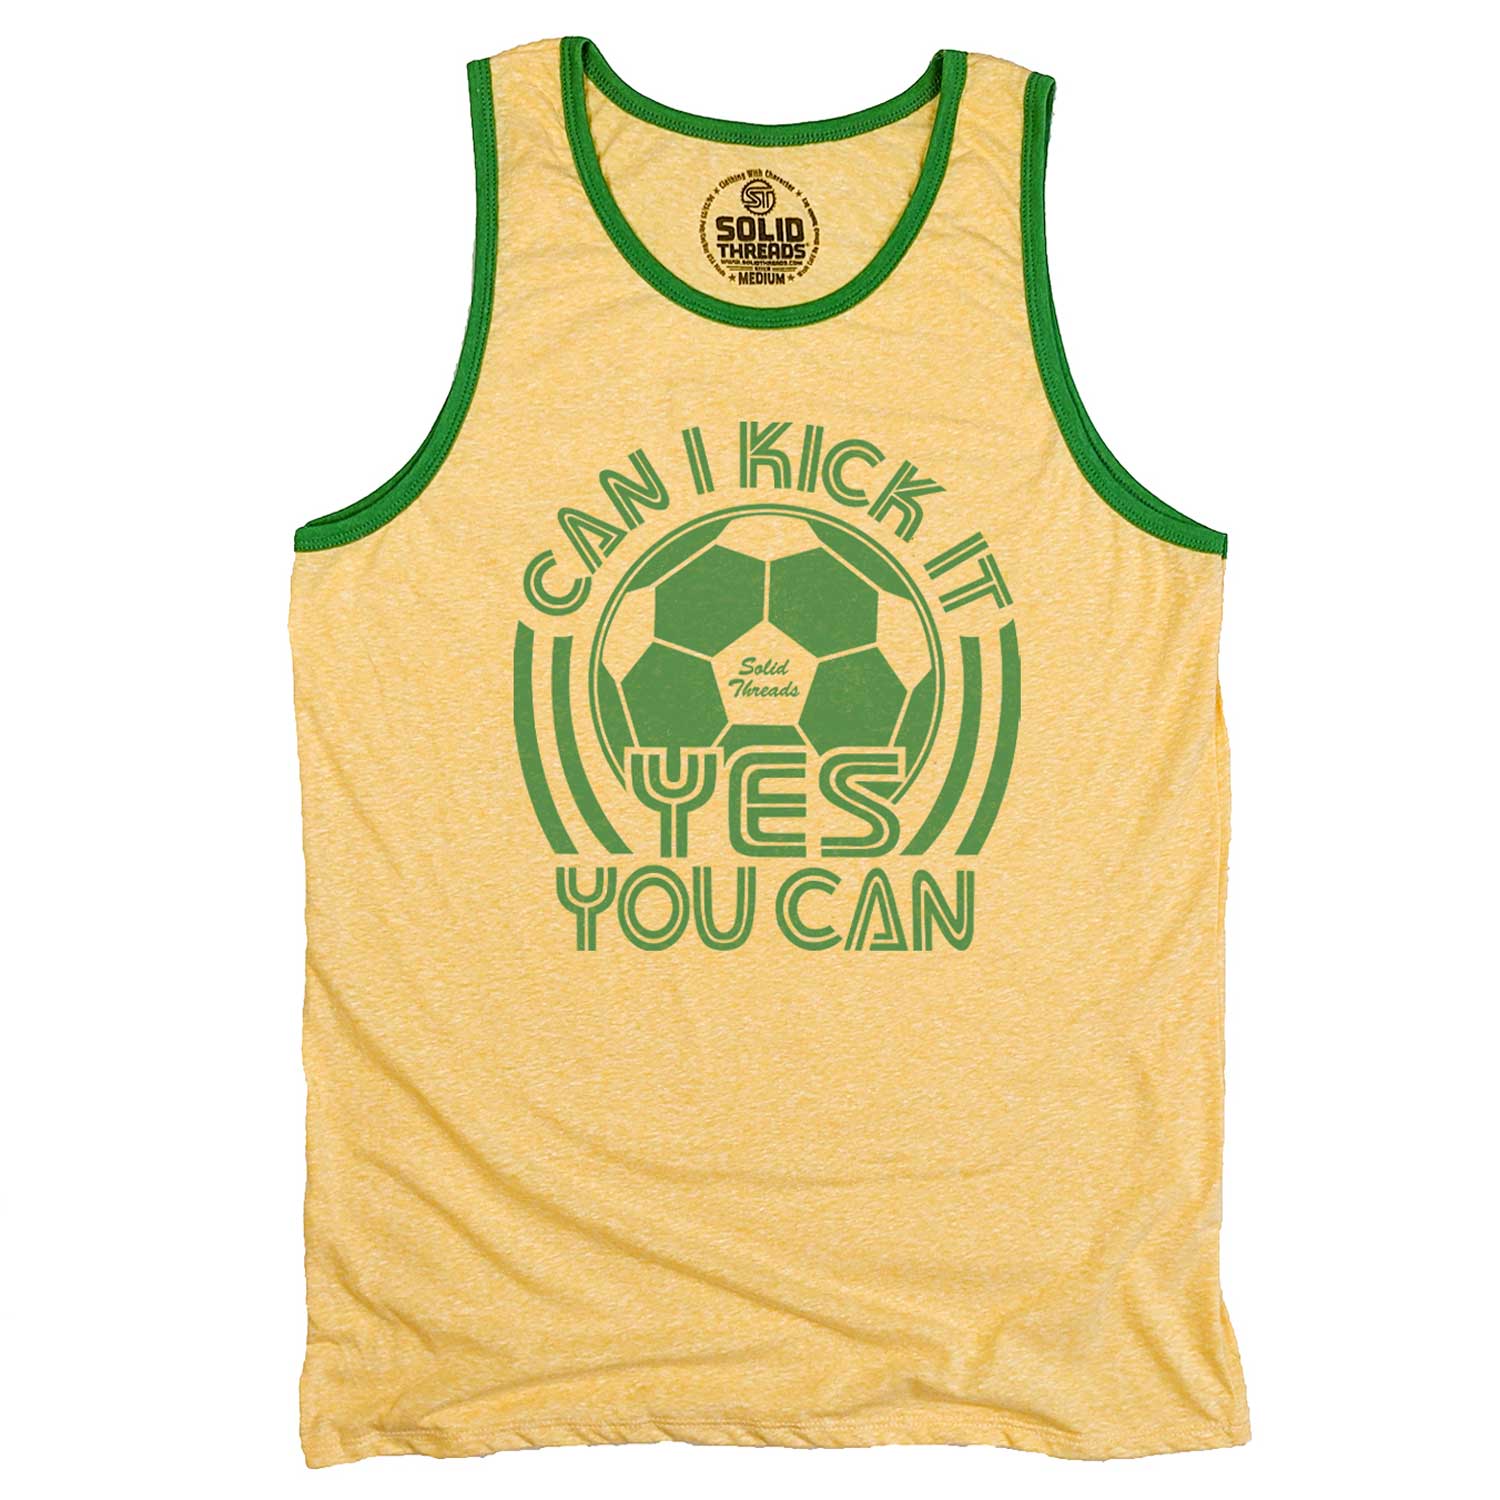 Men's Can I Kick It, Yes You Can Vintage Graphic Tank Top | Funny Soccer T-shirt | Solid Threads